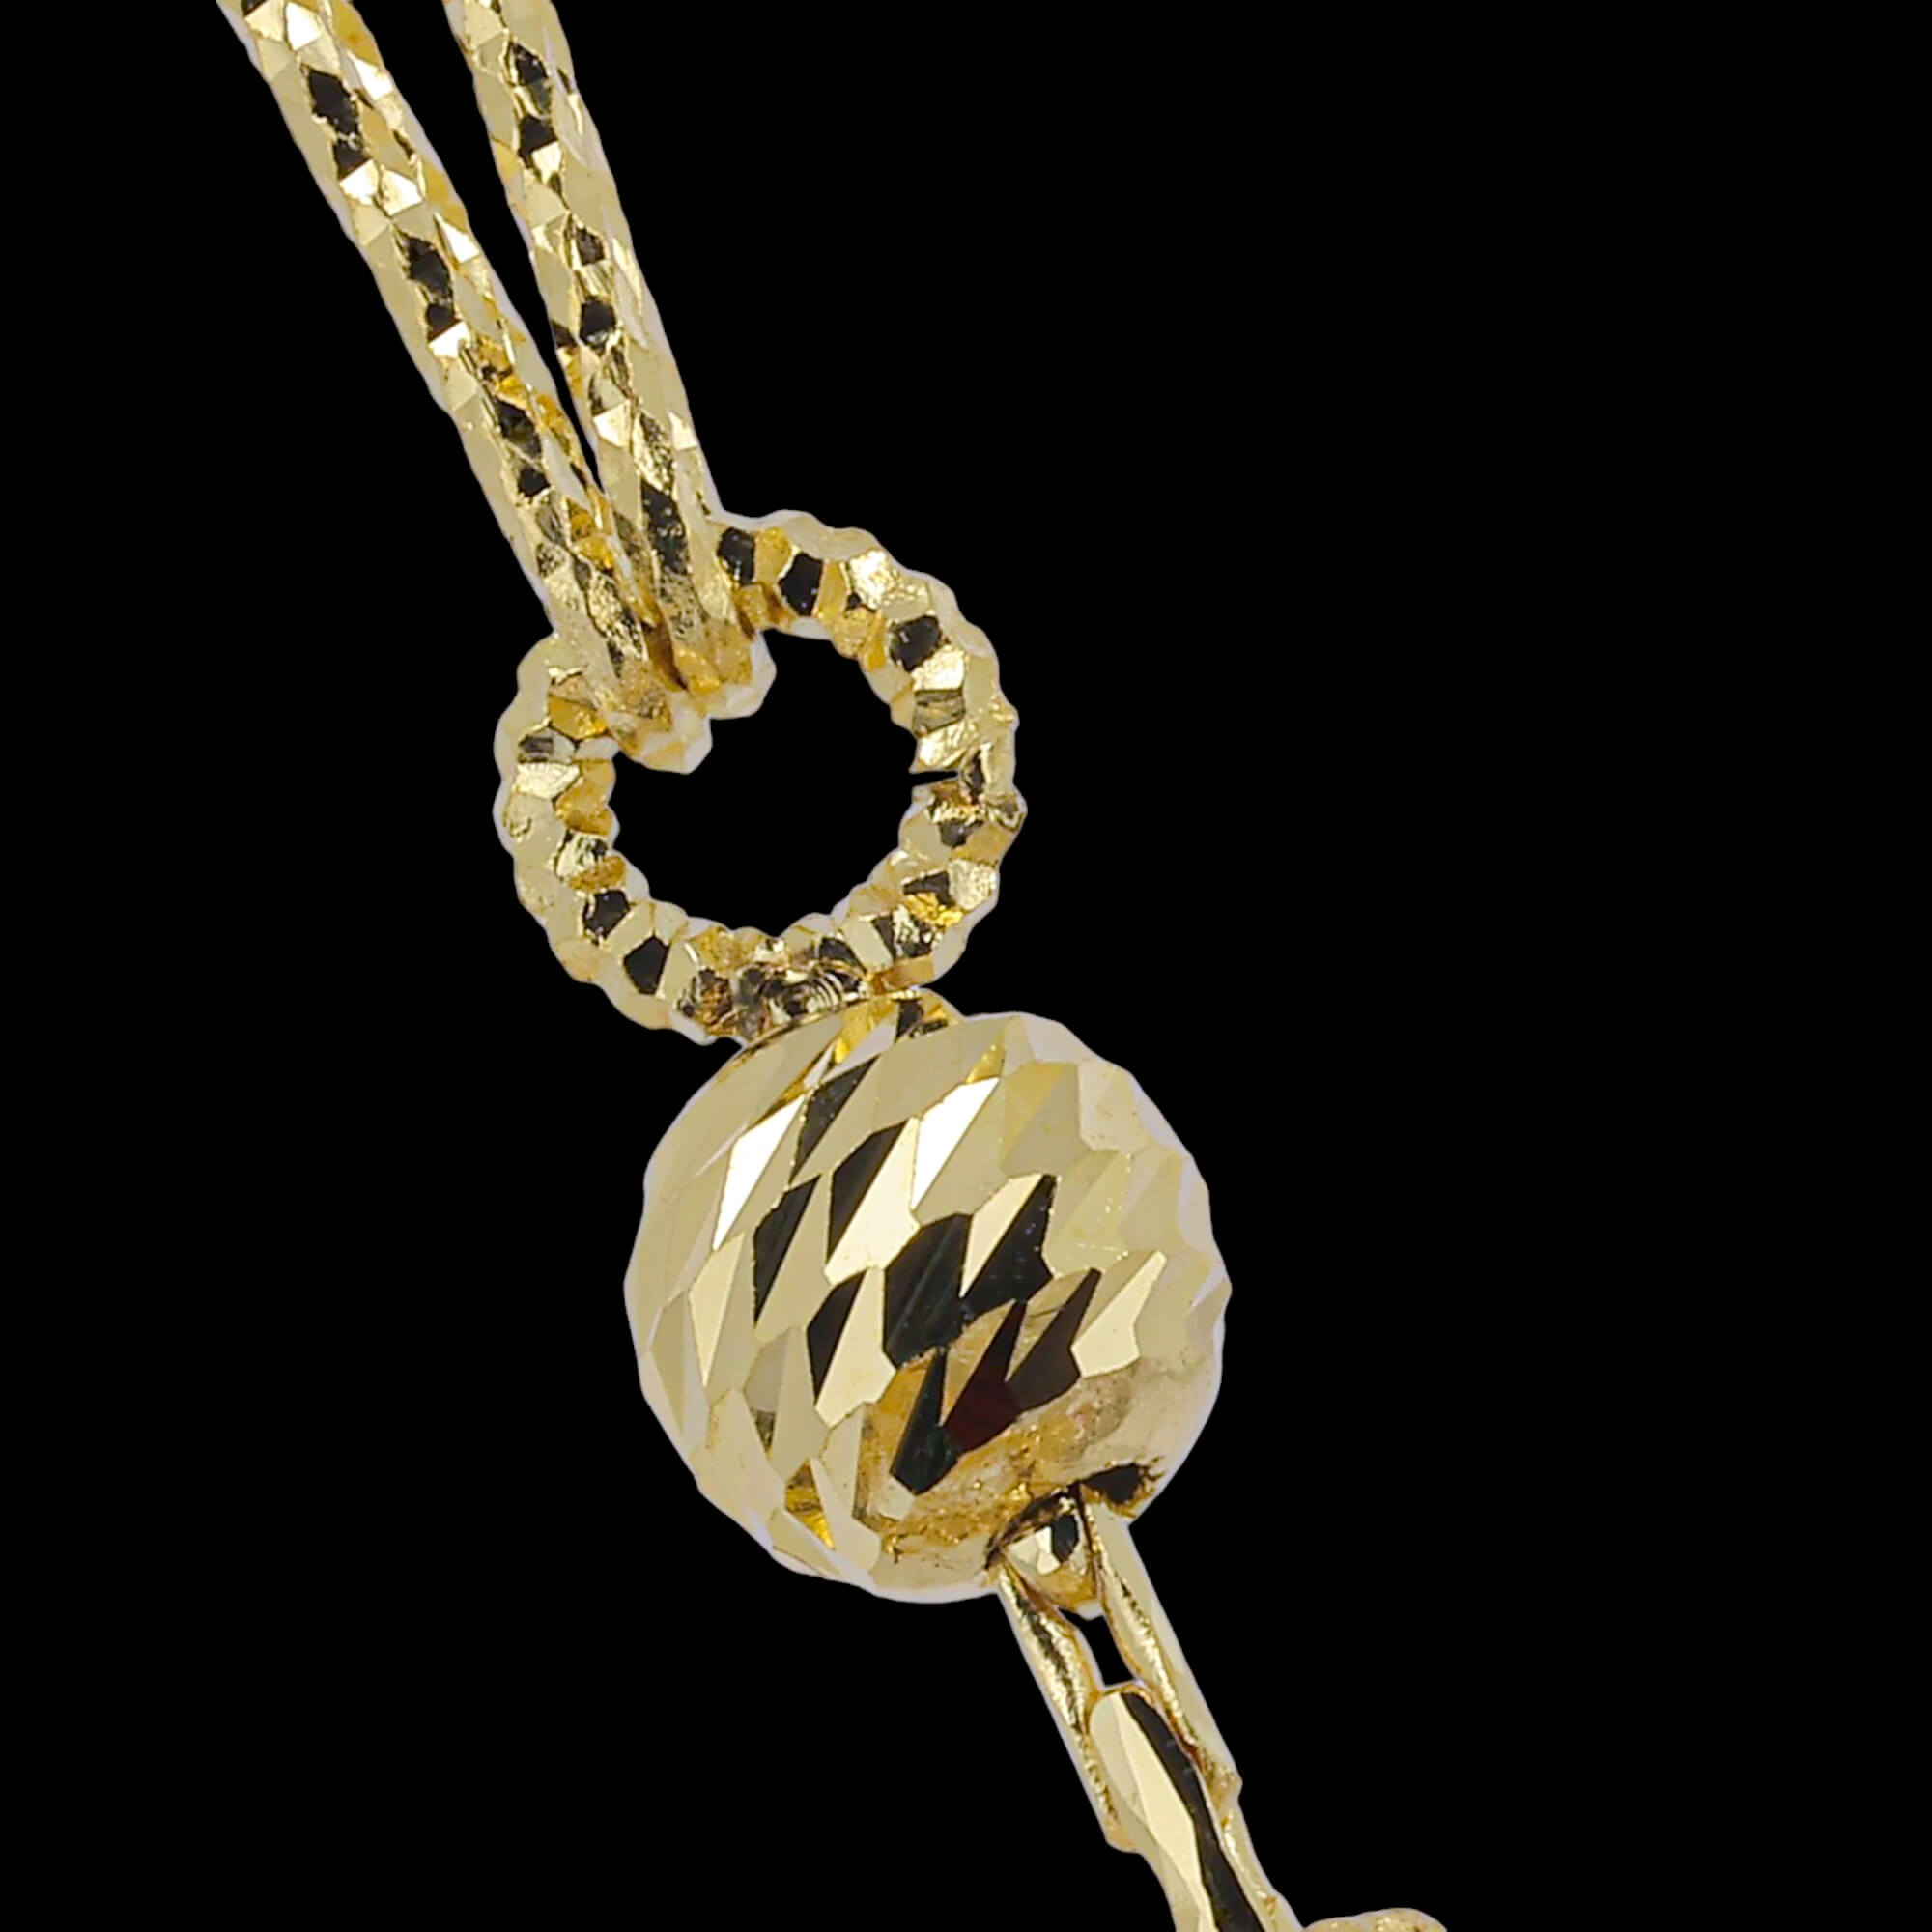 Gold tricolor necklace made of 18kt gold, 5 elements